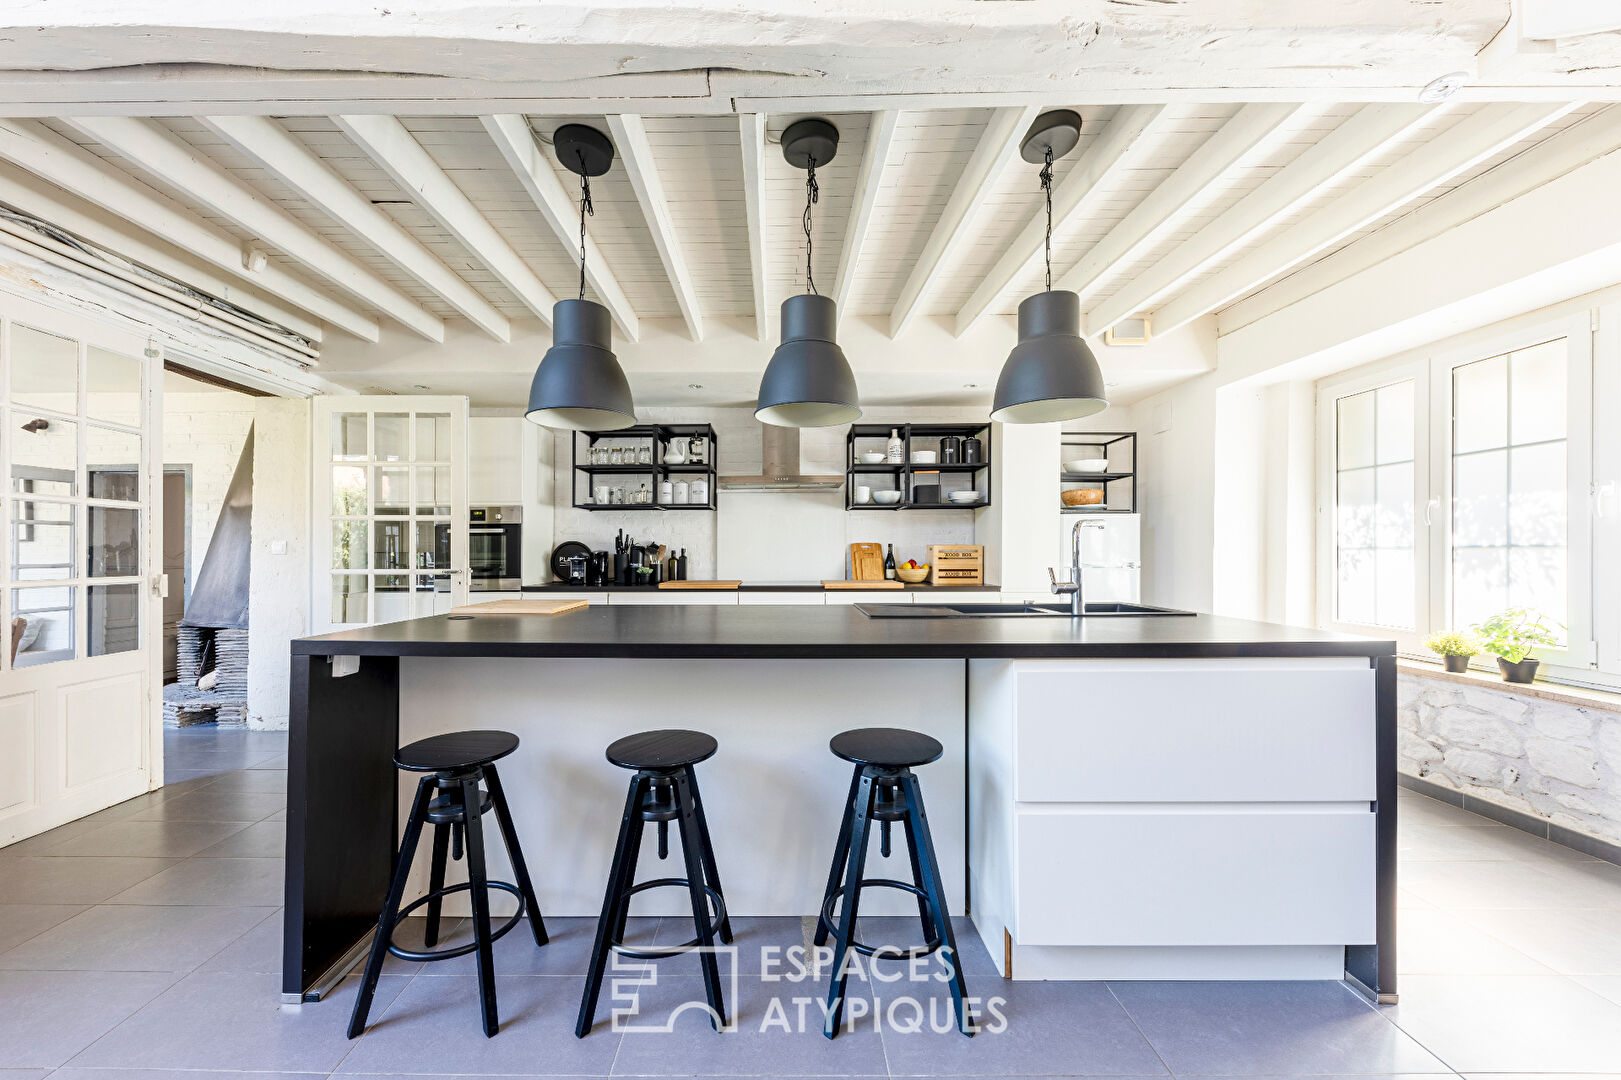 The purist – Former paint workshop converted into a home.